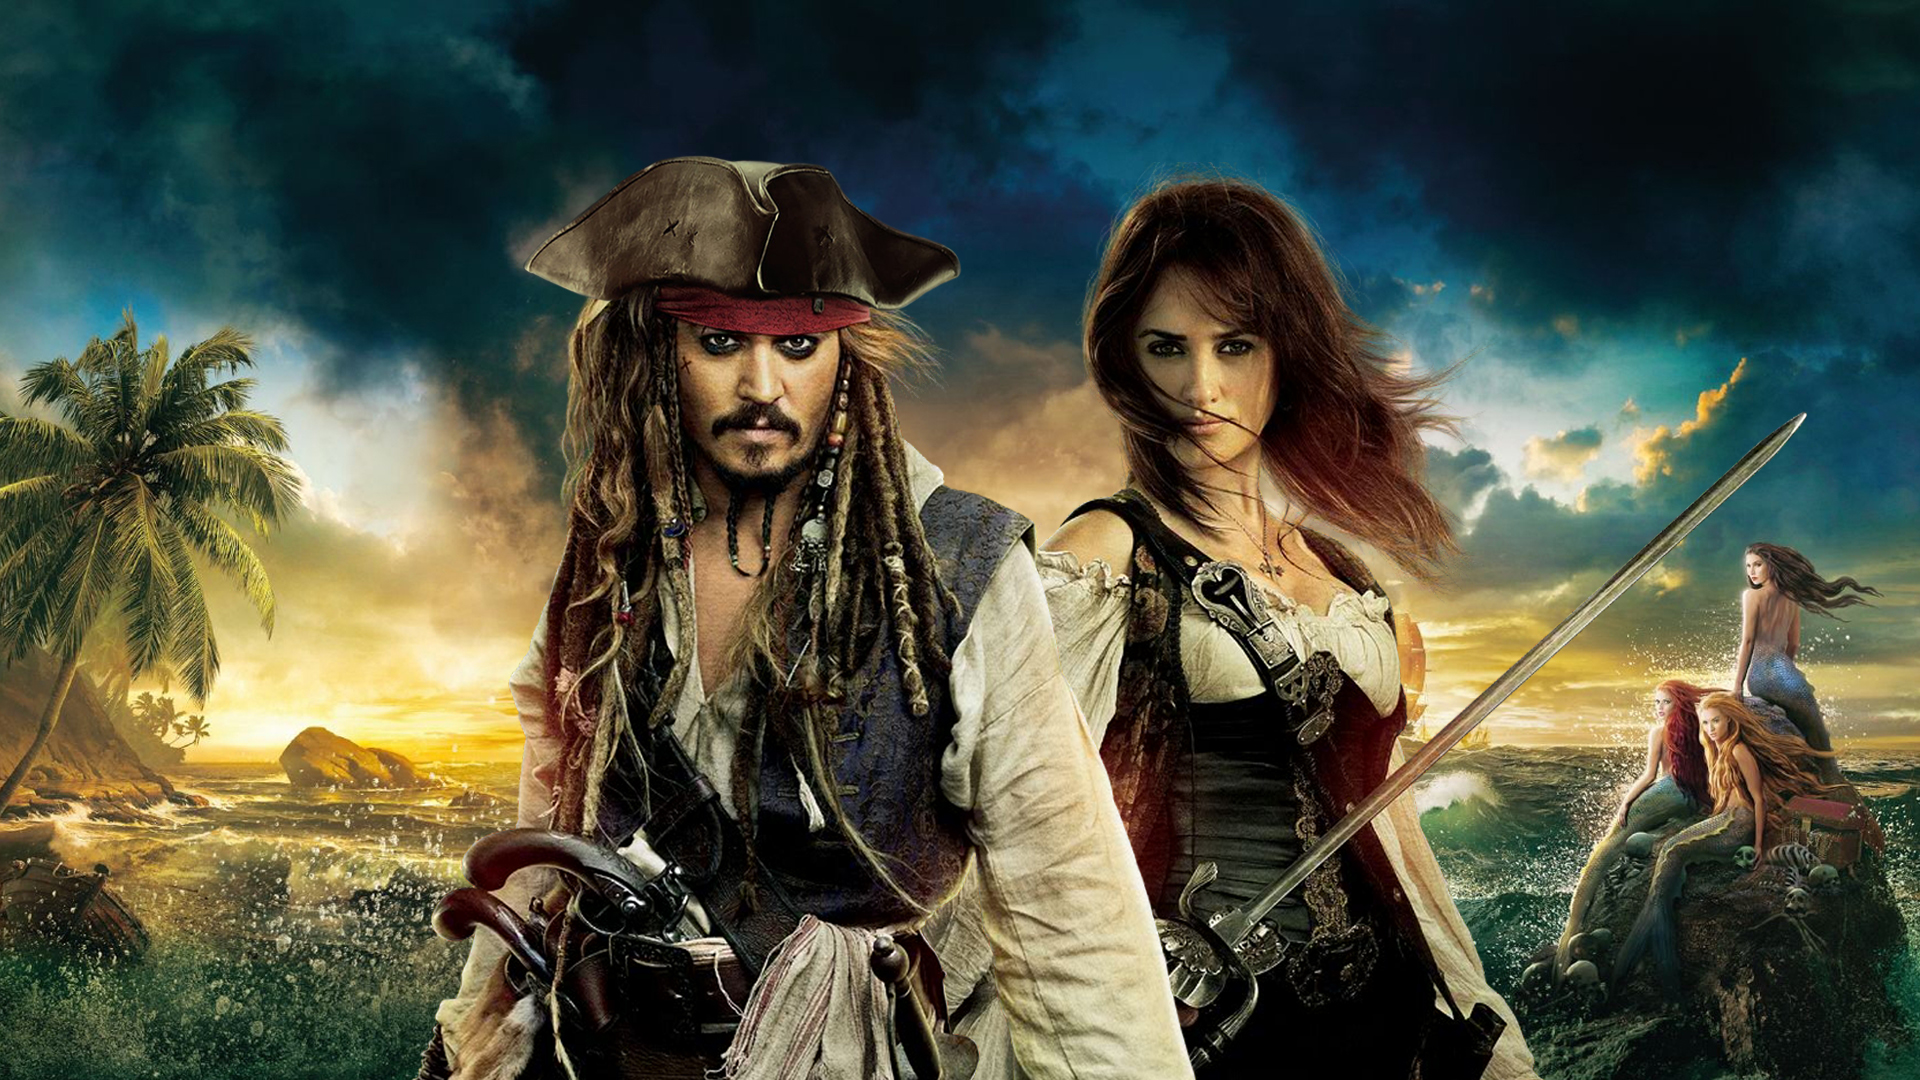 Pirates Of The Caribbean: On Stranger Tides Backgrounds, Compatible - PC, Mobile, Gadgets| 1920x1080 px